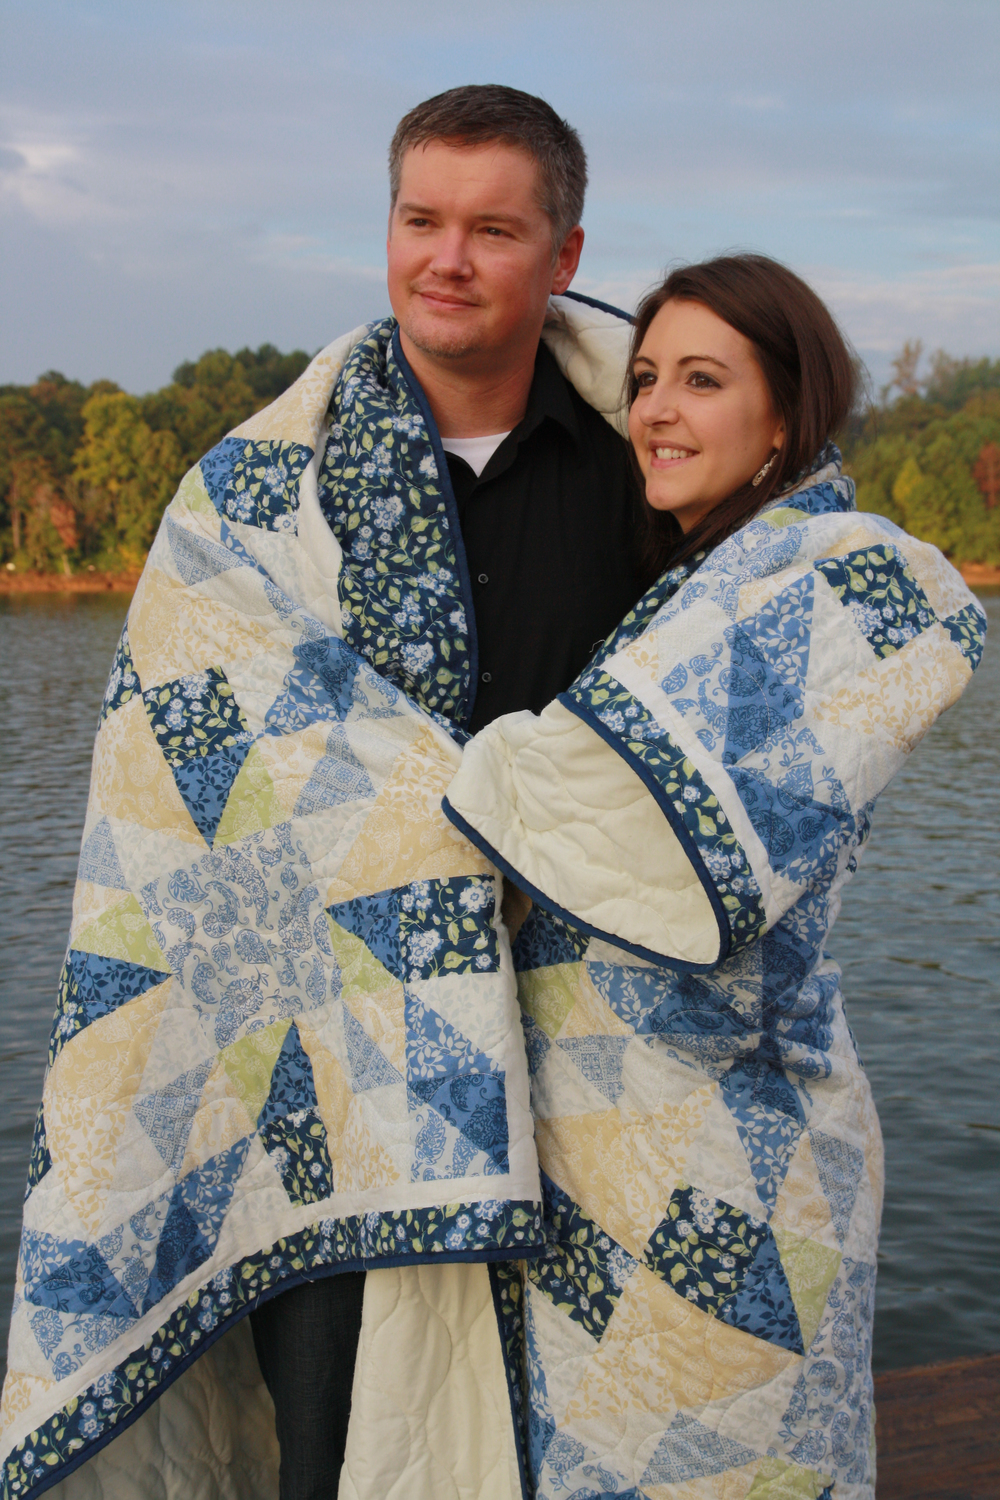 Pryse and Rachel wrapped up in blanket standing at the lake edge